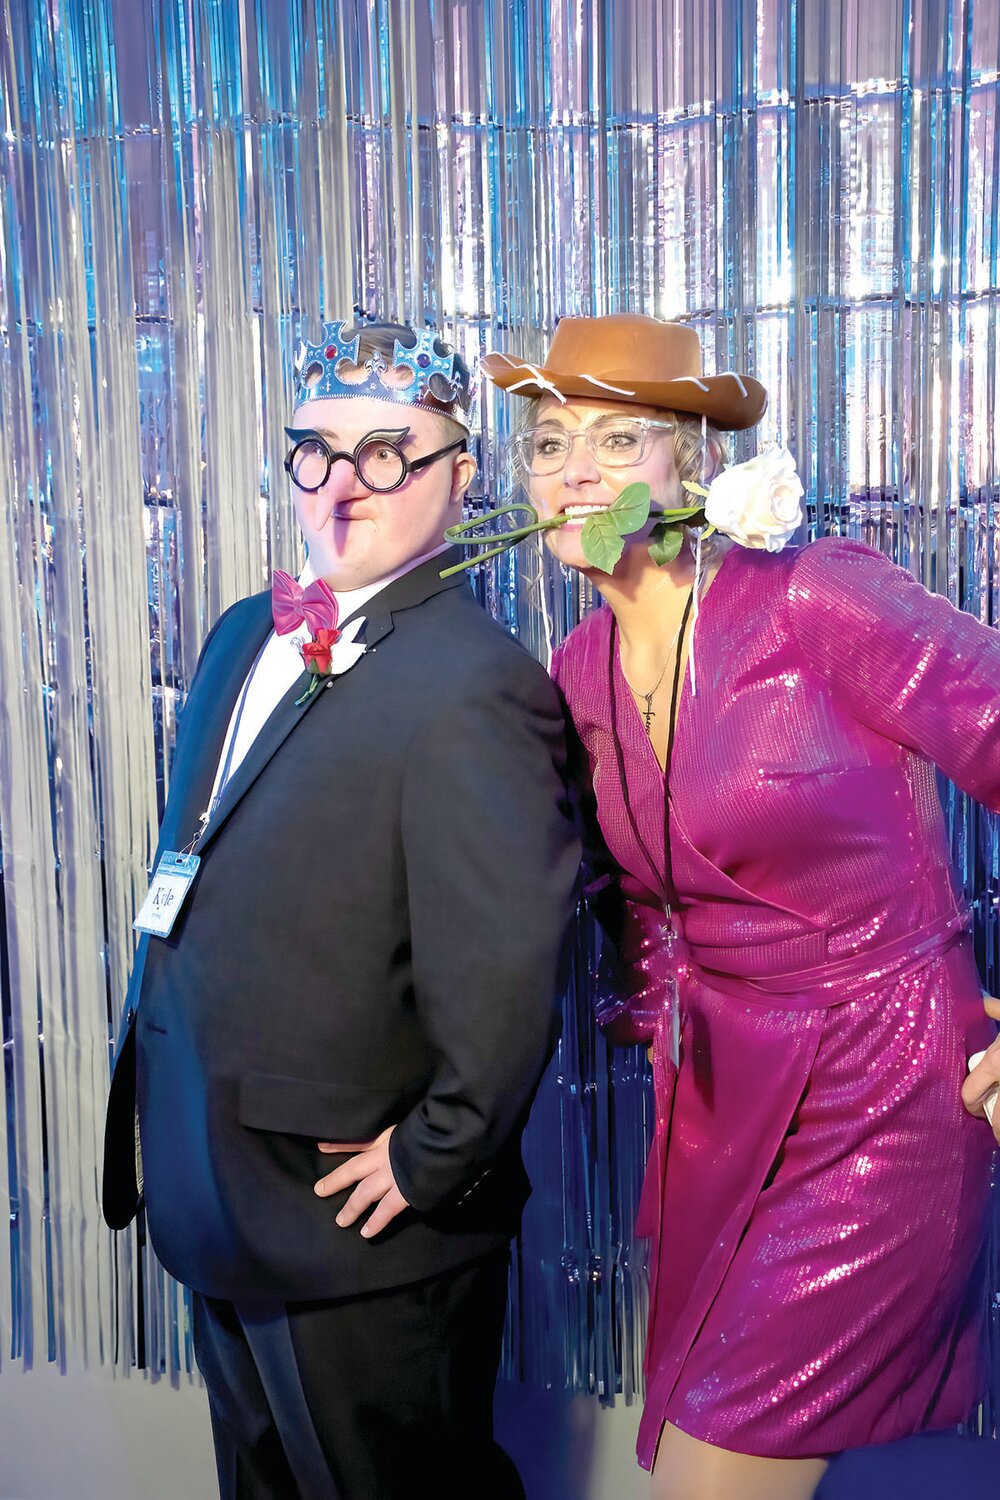 Kyle Strassburg and his Night to Shine buddy Stacy Pletz have fun at the photo booth.